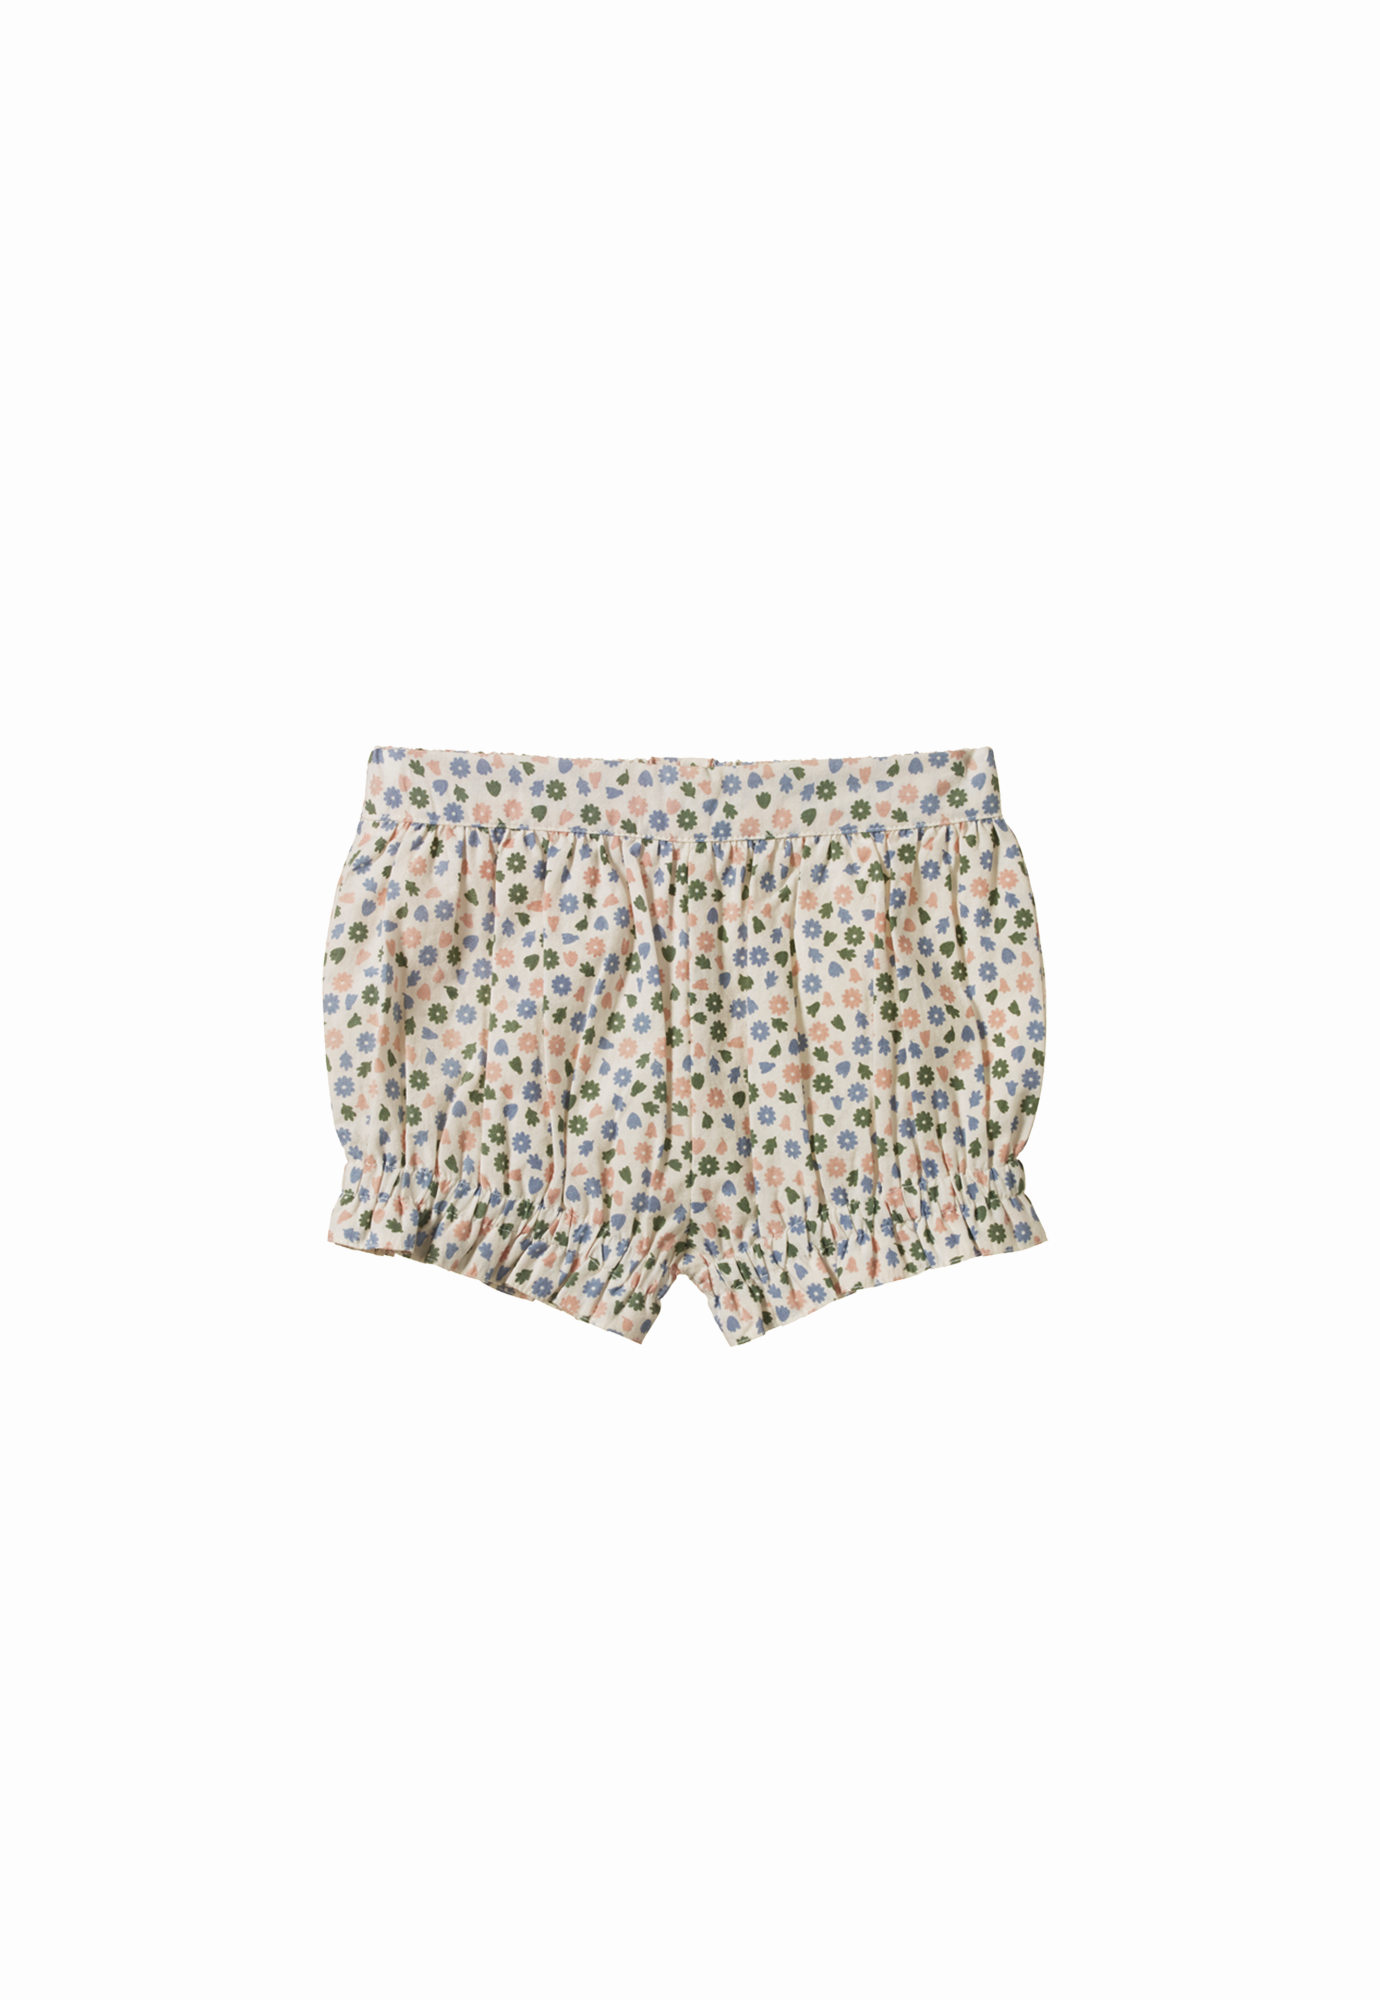 nature baby - betty shorts - chamomile blooms